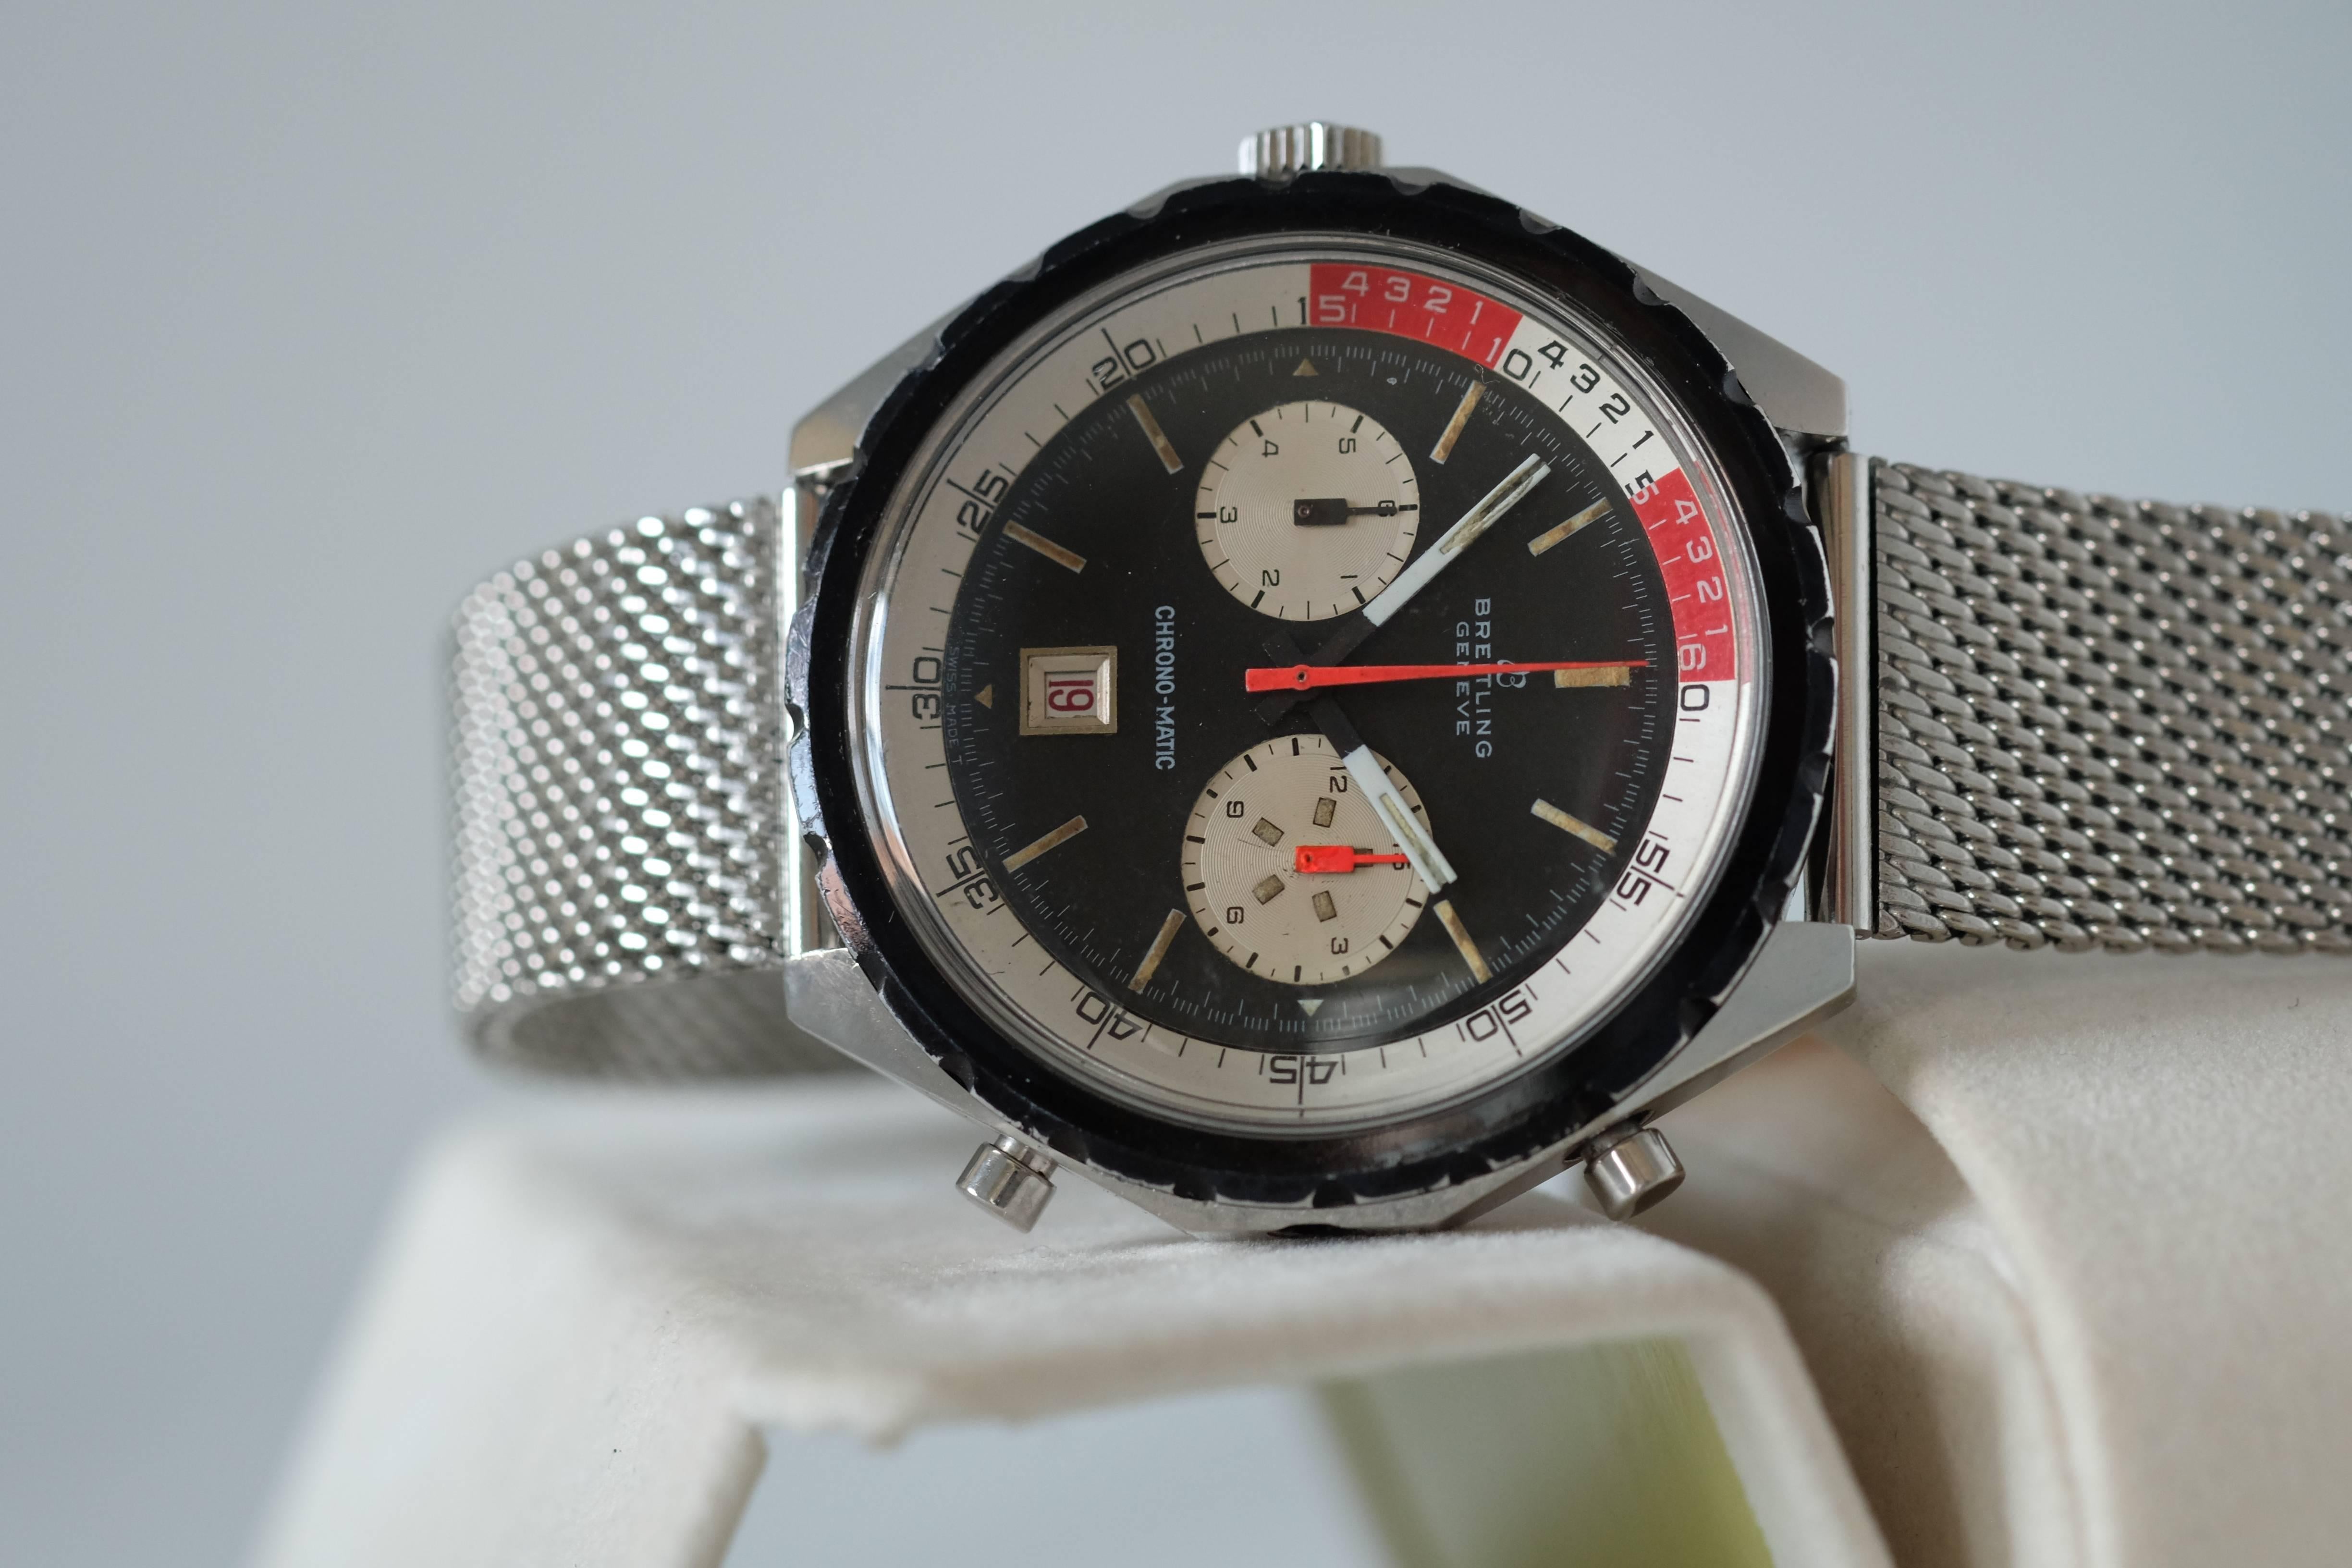 Breitling Chrono-matic yachting Stainless steel ref 7651

Breitling Genève, 